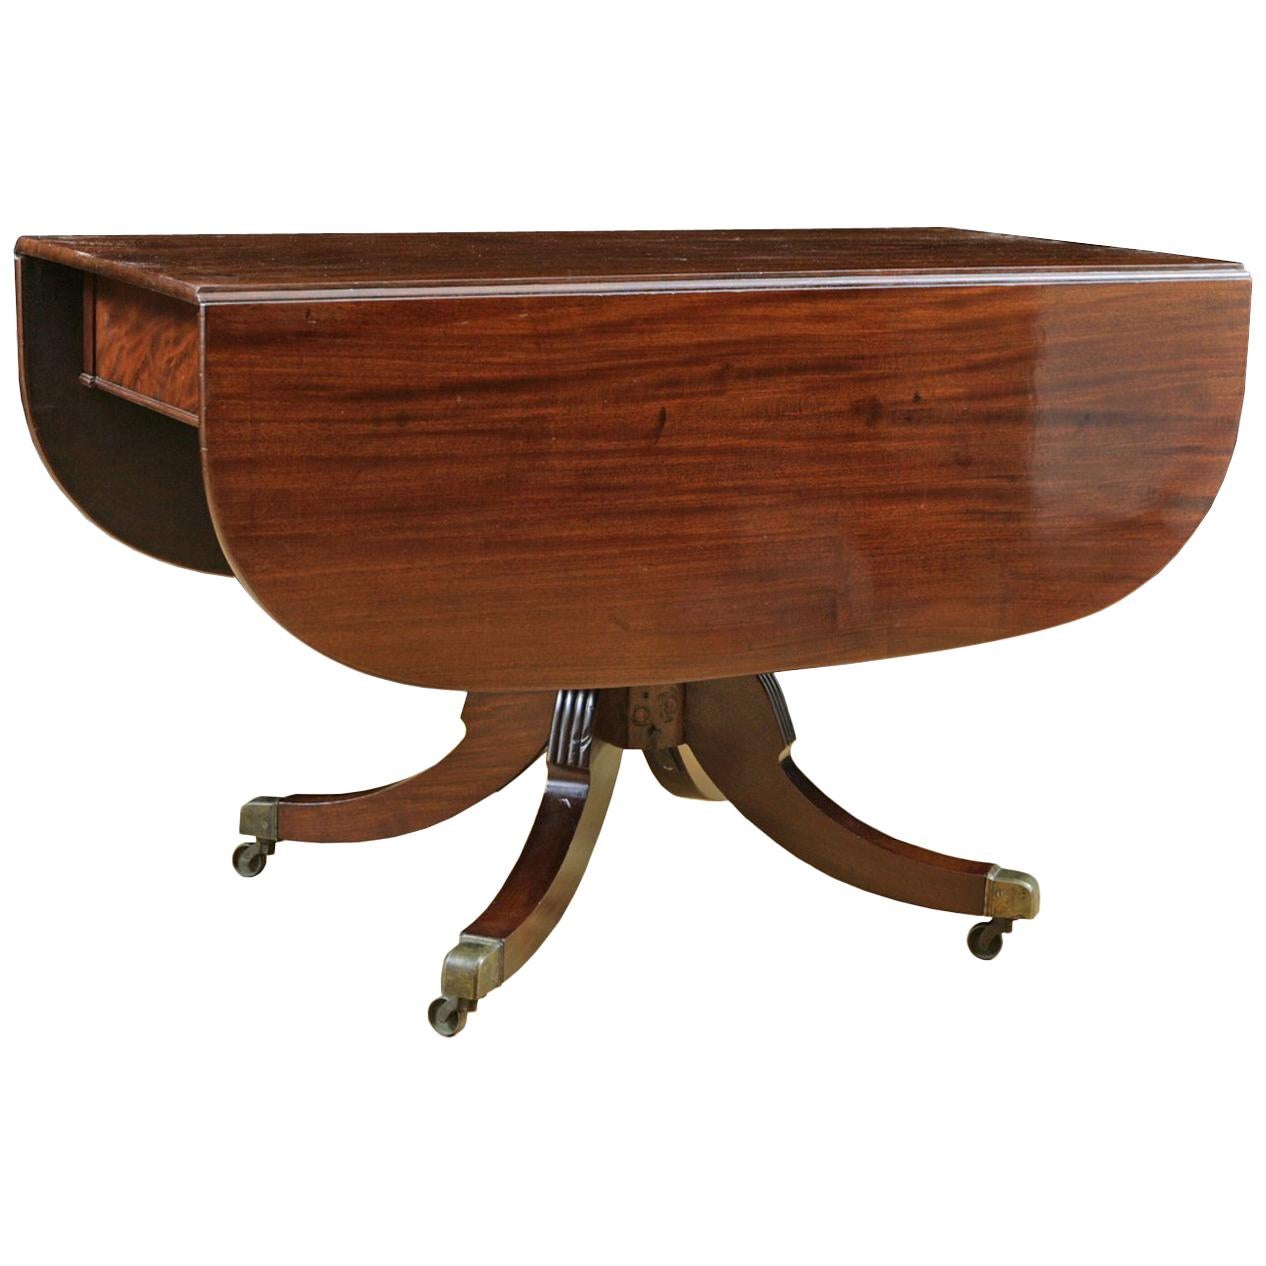 American Sheraton Centre-Pedestal, Drop-Leaf Breakfast Table in Mahogany For Sale